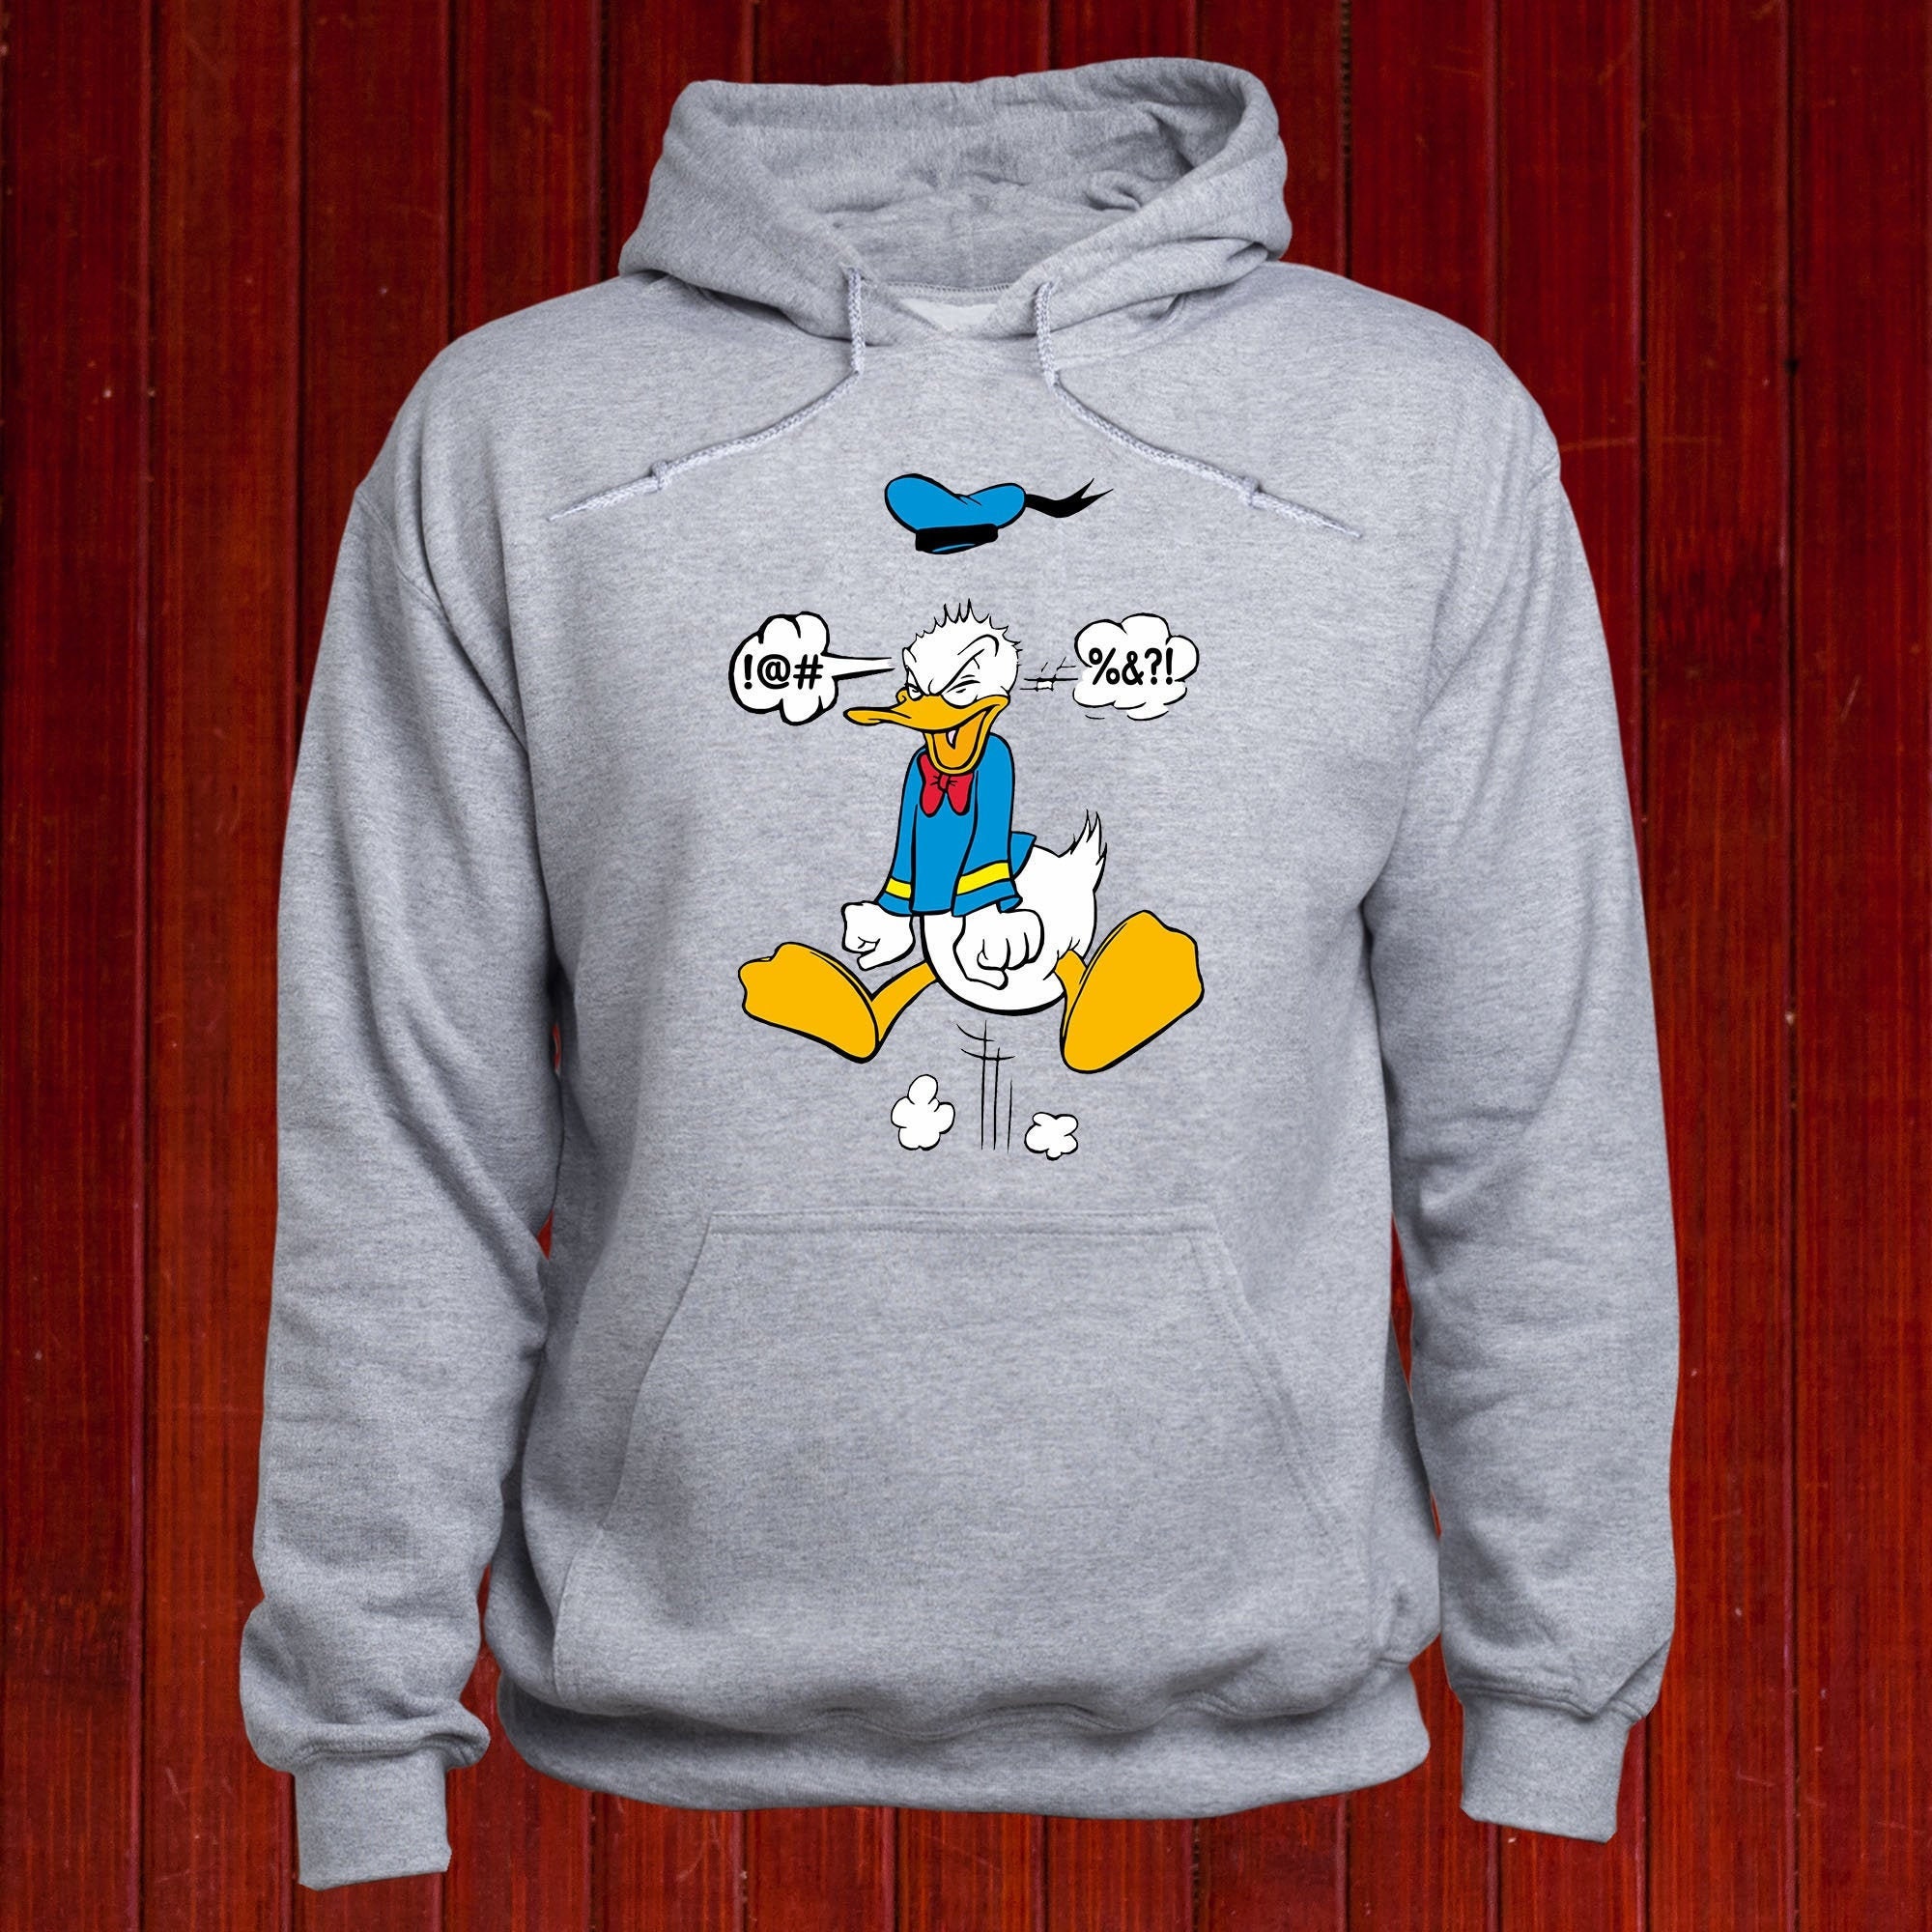 Disney Donald Duck Angry Hoodie, Furious Donald Duck Jumper